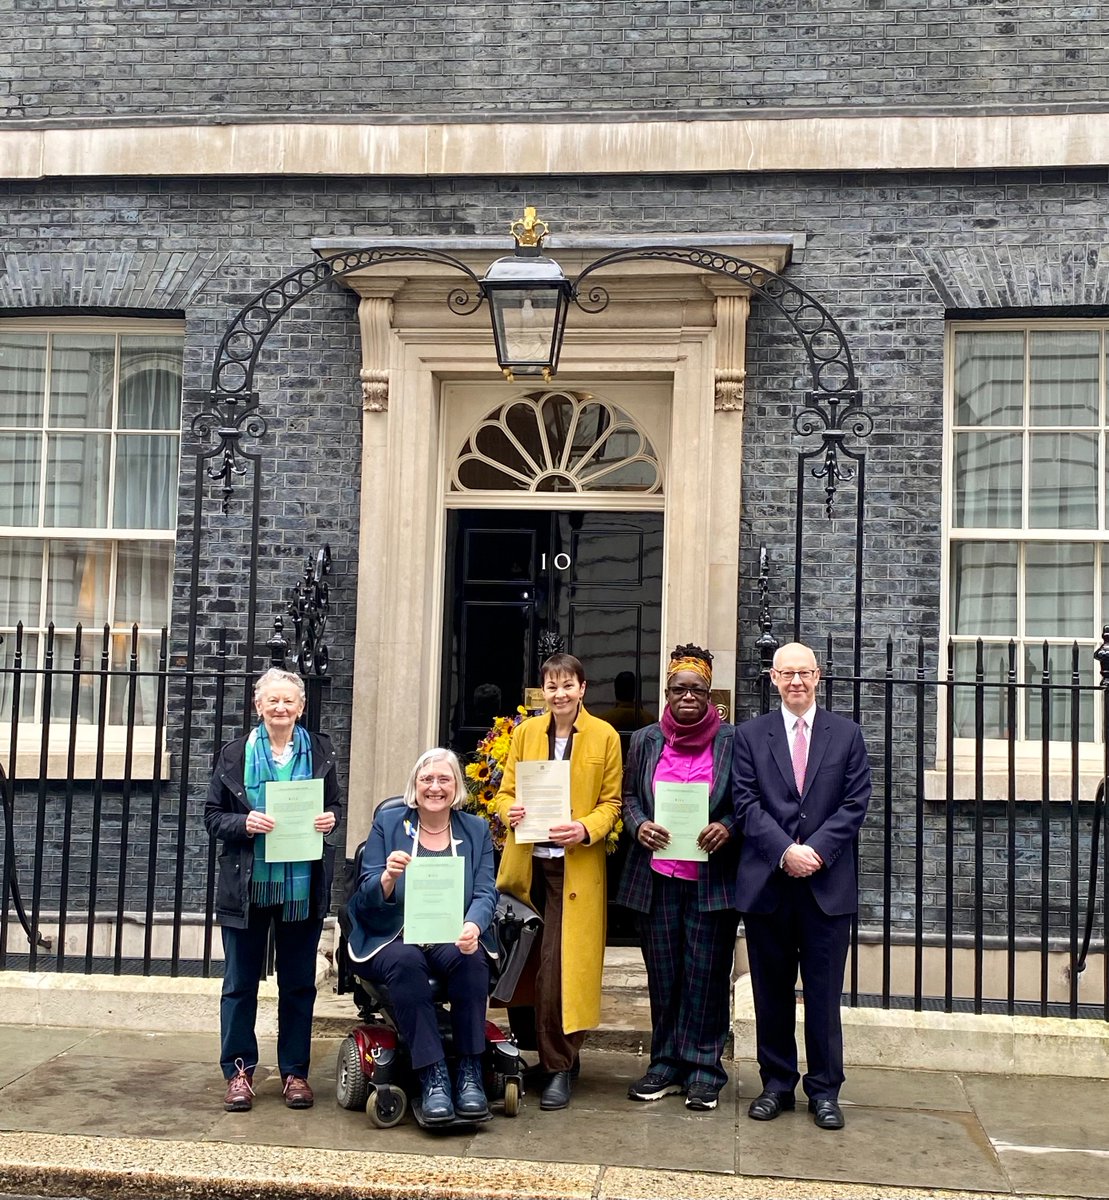 🚨I’ve just been to 10 Downing Street to deliver a letter to the PM - urging him to take up #EllasLaw and to make clean air a human right for all. The longer it takes him & his Govt to clean up our dirty, toxic air, the more lives will be put at risk - he *must* support this Bill